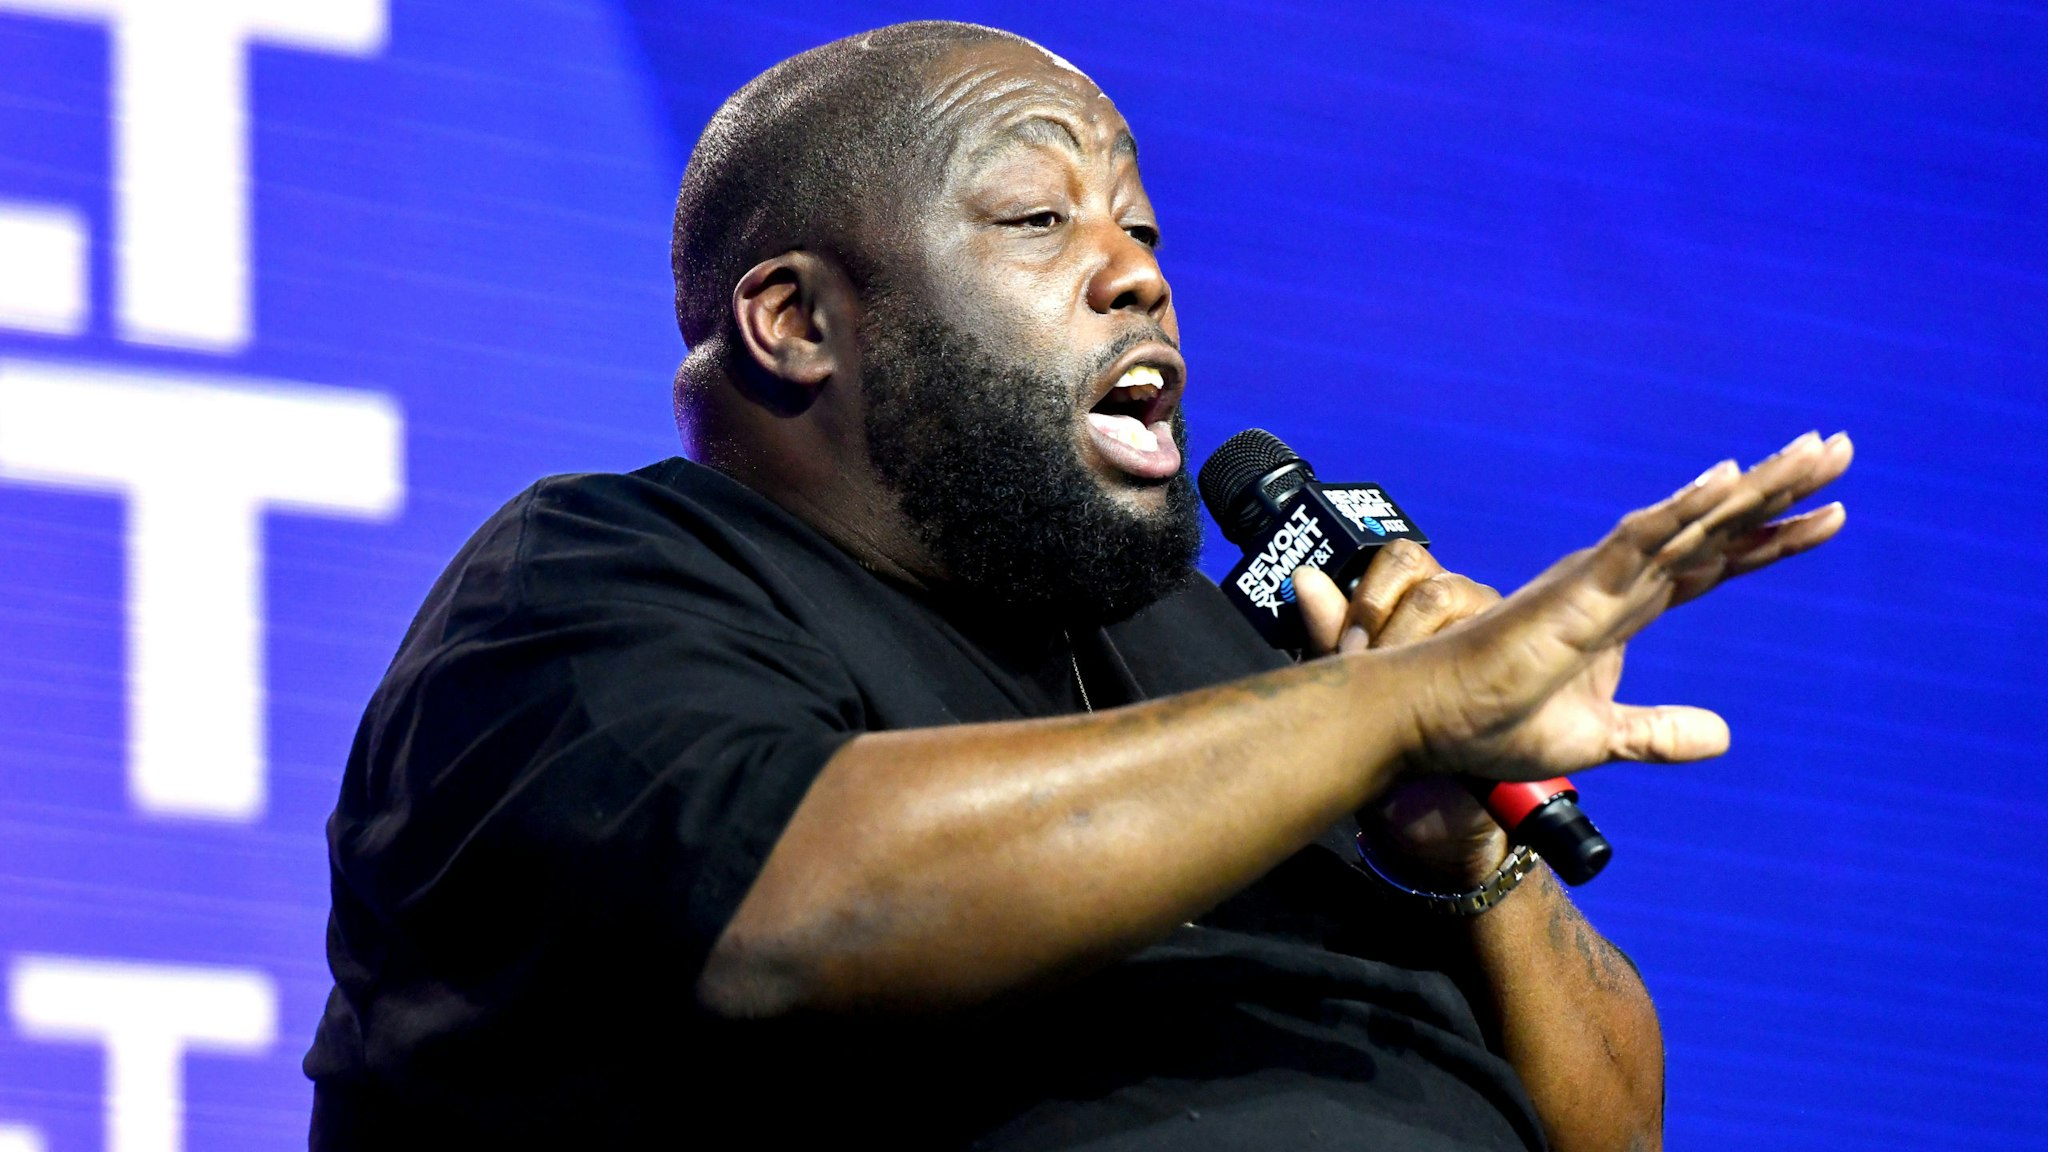 LOS ANGELES, CALIFORNIA - OCTOBER 25: Rapper Killer Mike attends the REVOLT &amp; AT&amp;T Summit on October 25, 2019 in Los Angeles, California.